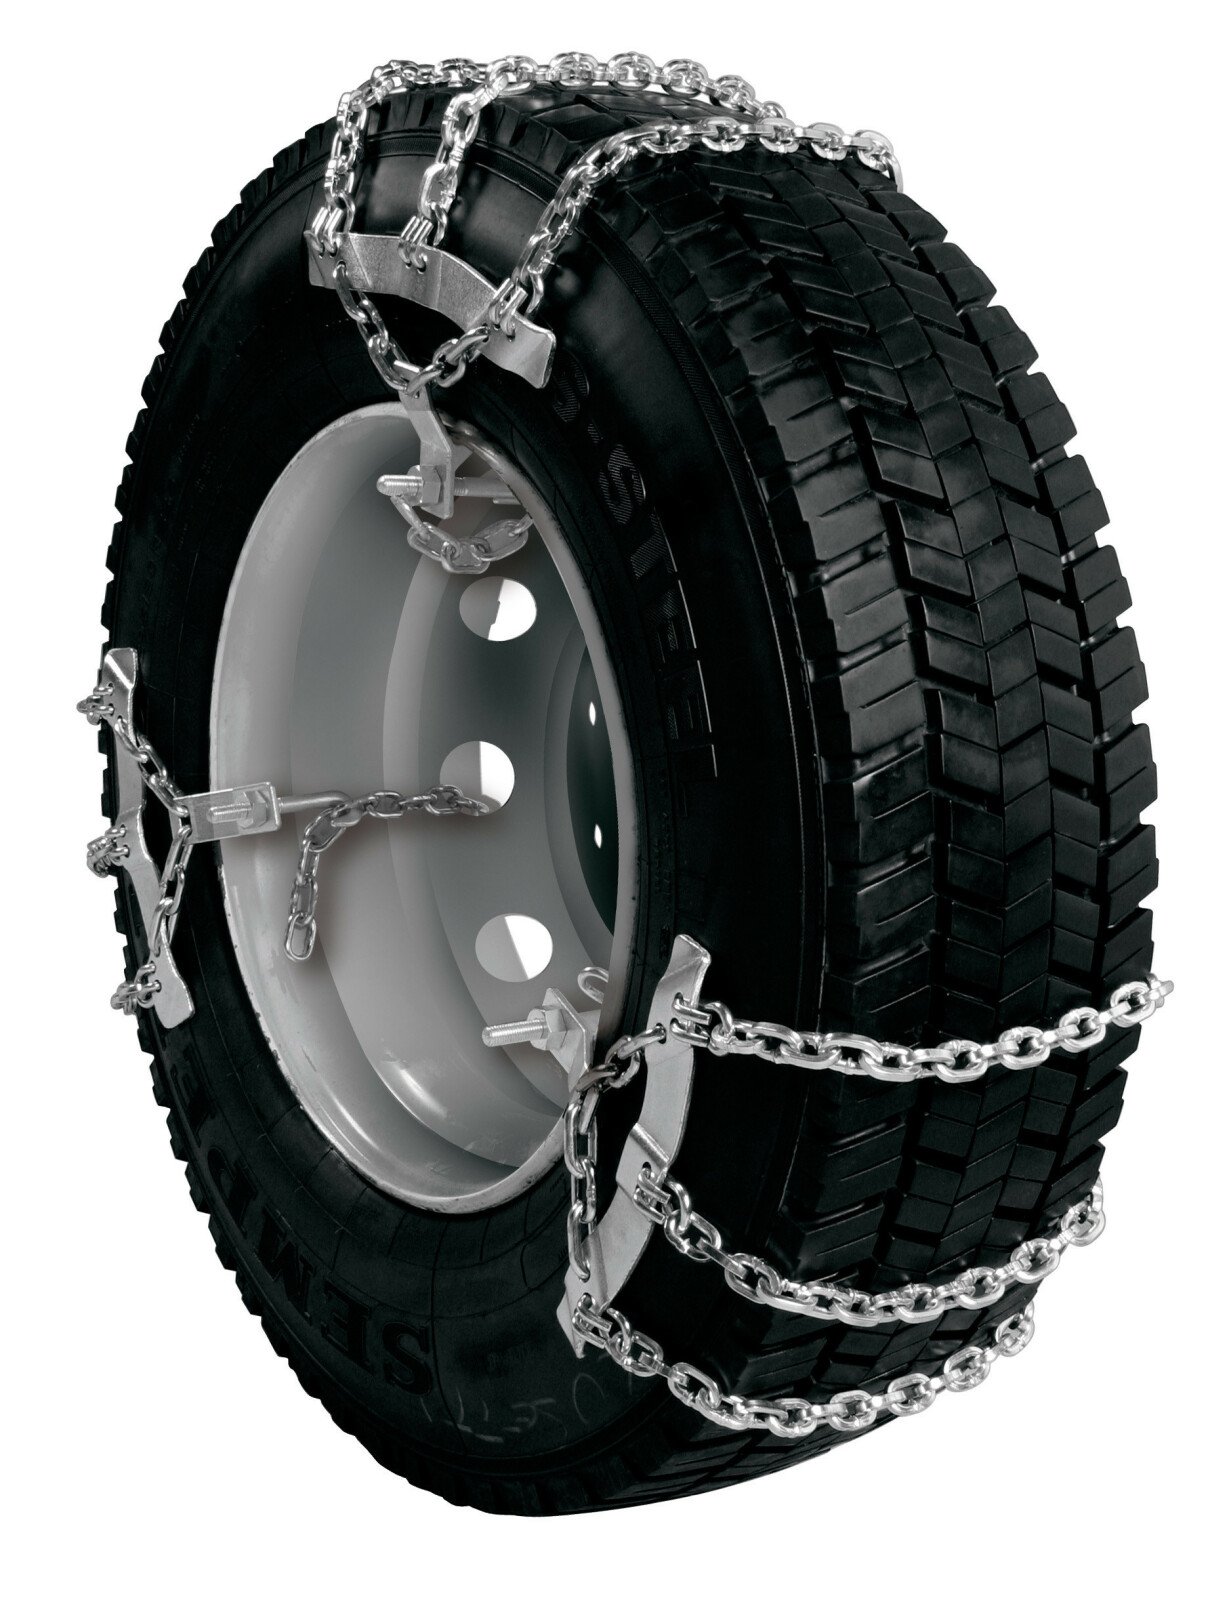 Track sector chains for trucks - XL-3 thumb